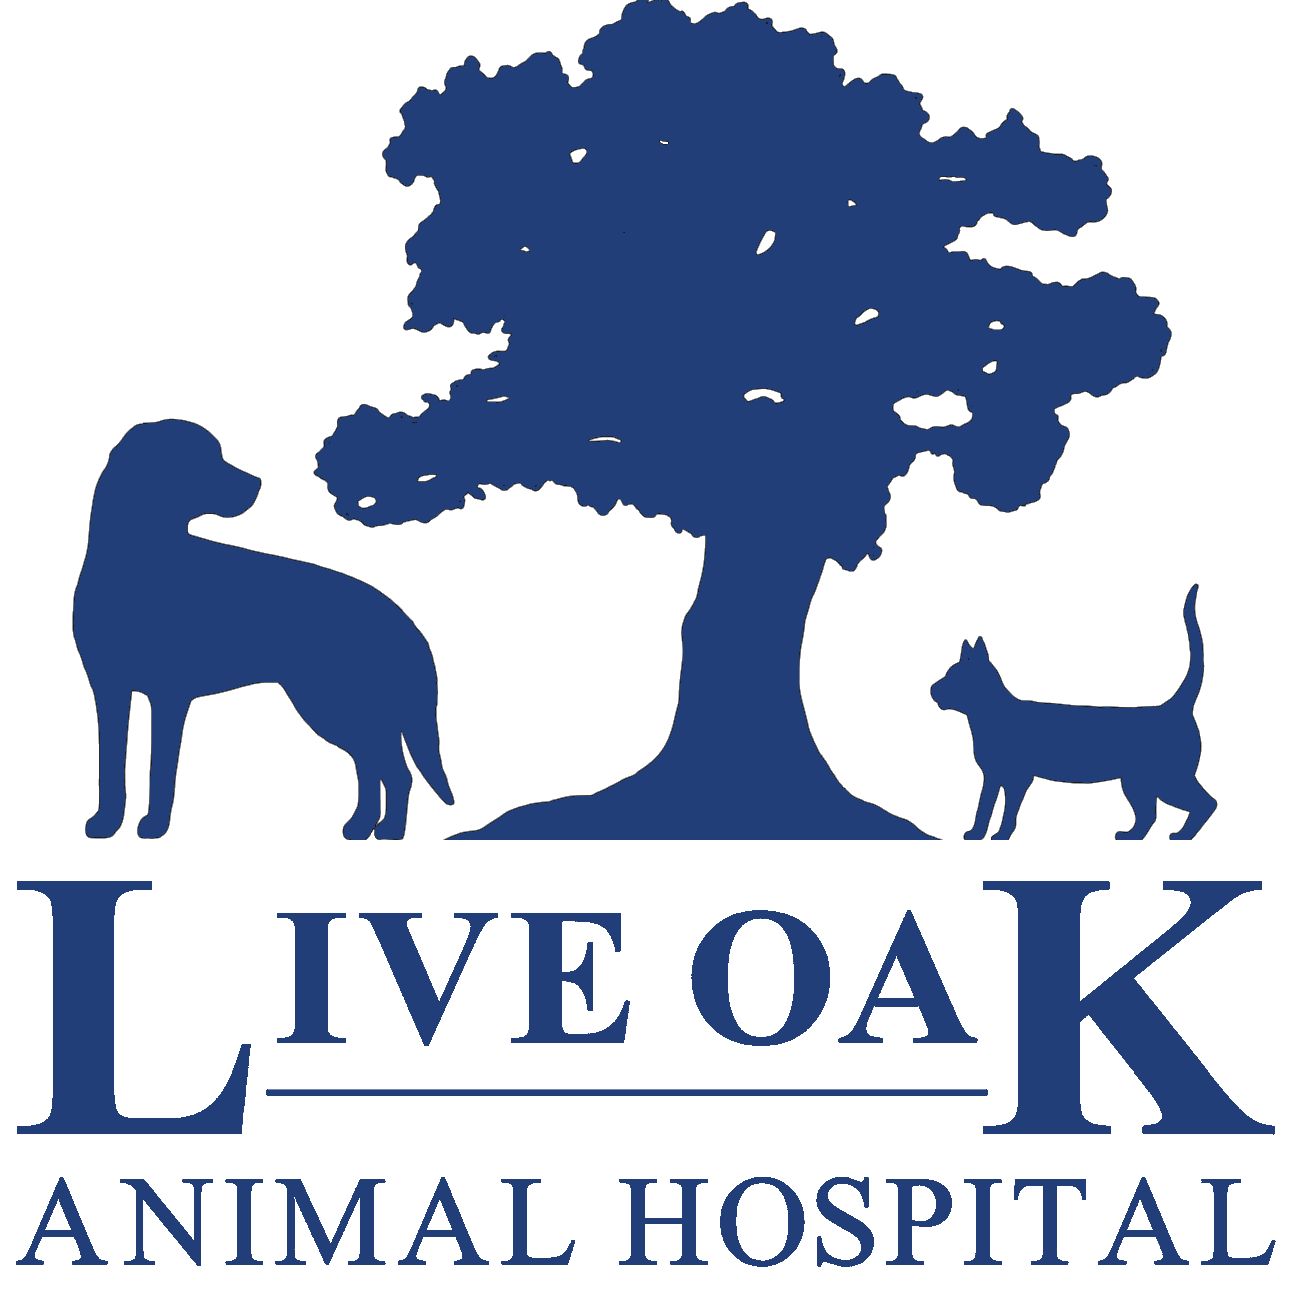 Top Rated Local Veterinarians Live Oak Animal Hospital